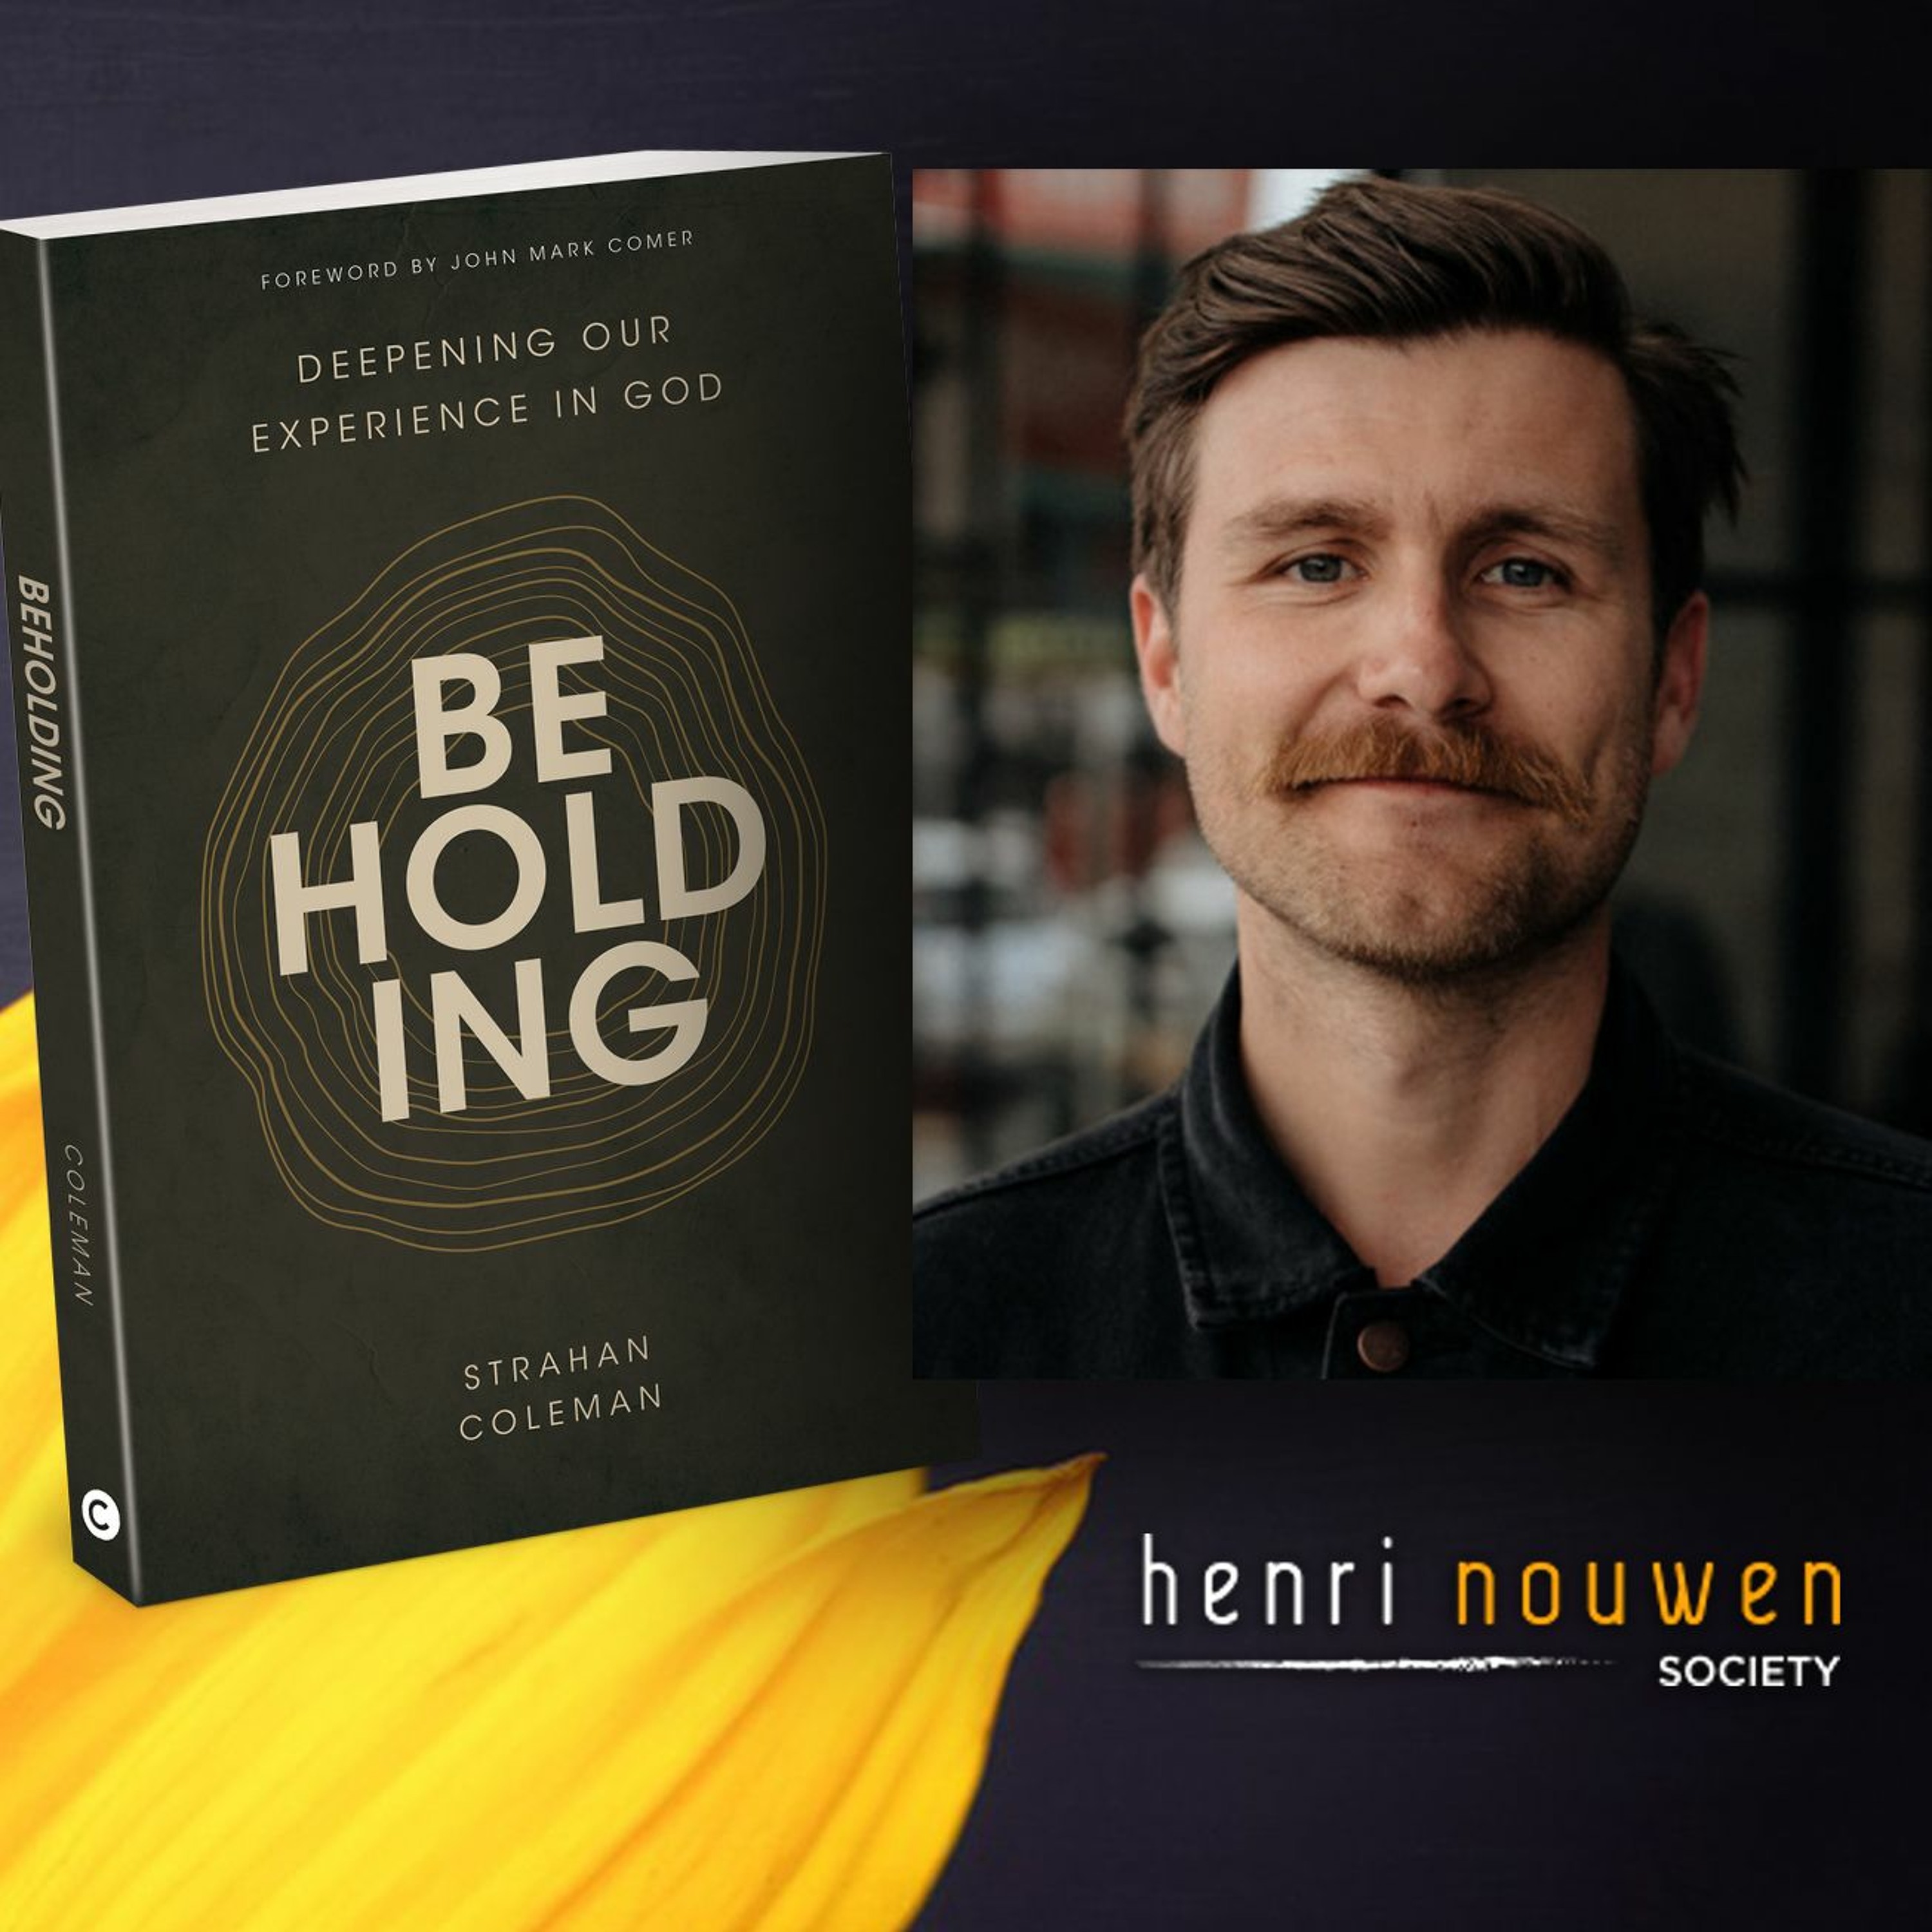 Henri Nouwen, Now & Then Podcast | Strahan Coleman "Beholding: Deepening Our Experience of God"